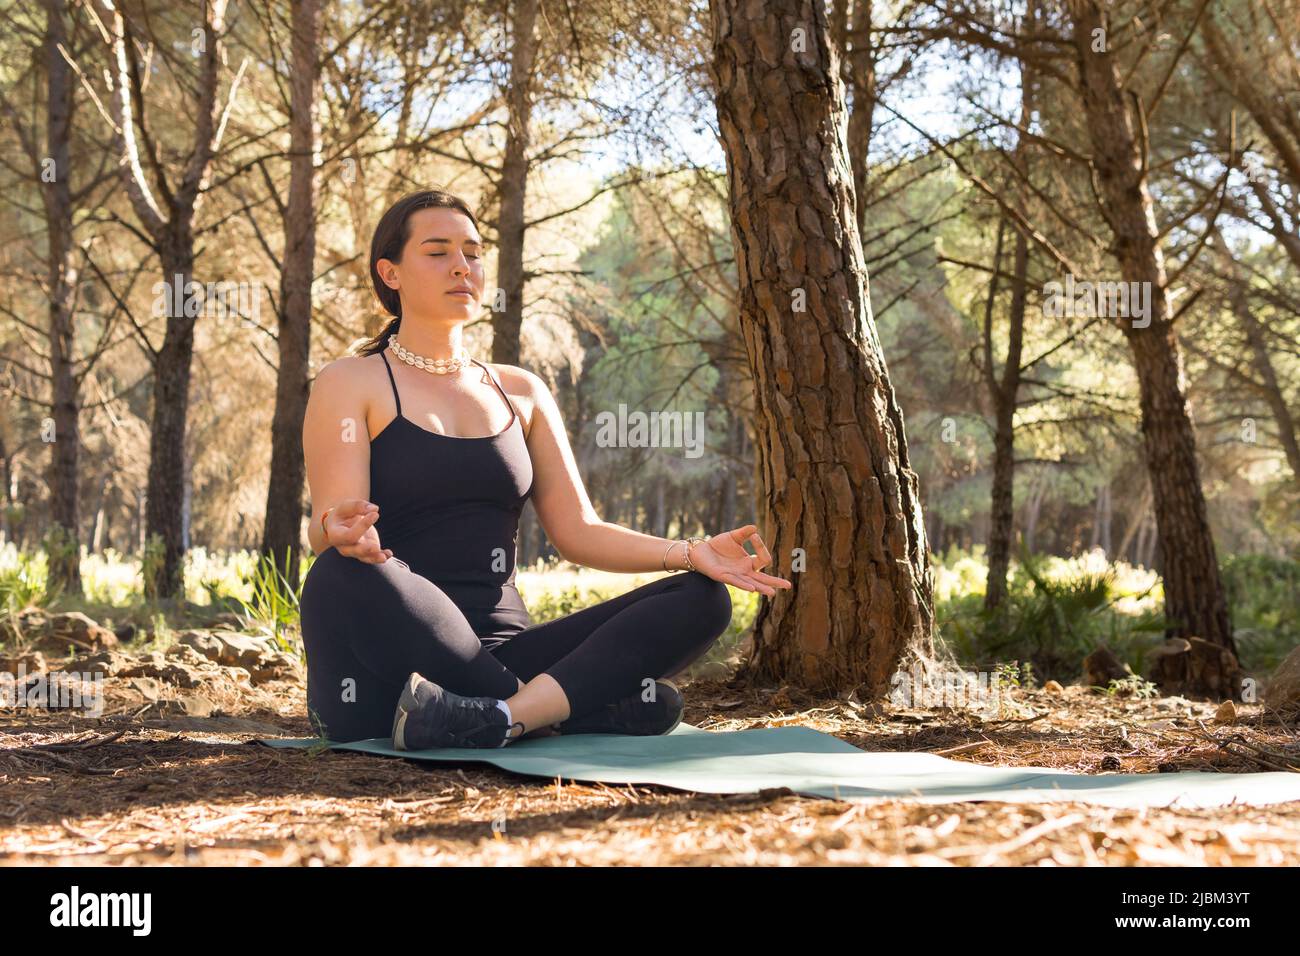 beautiful young adult girl doing meditation in the lotus posture at sunset in a forest surrounded by trees. open plane, horizontal. Stock Photo